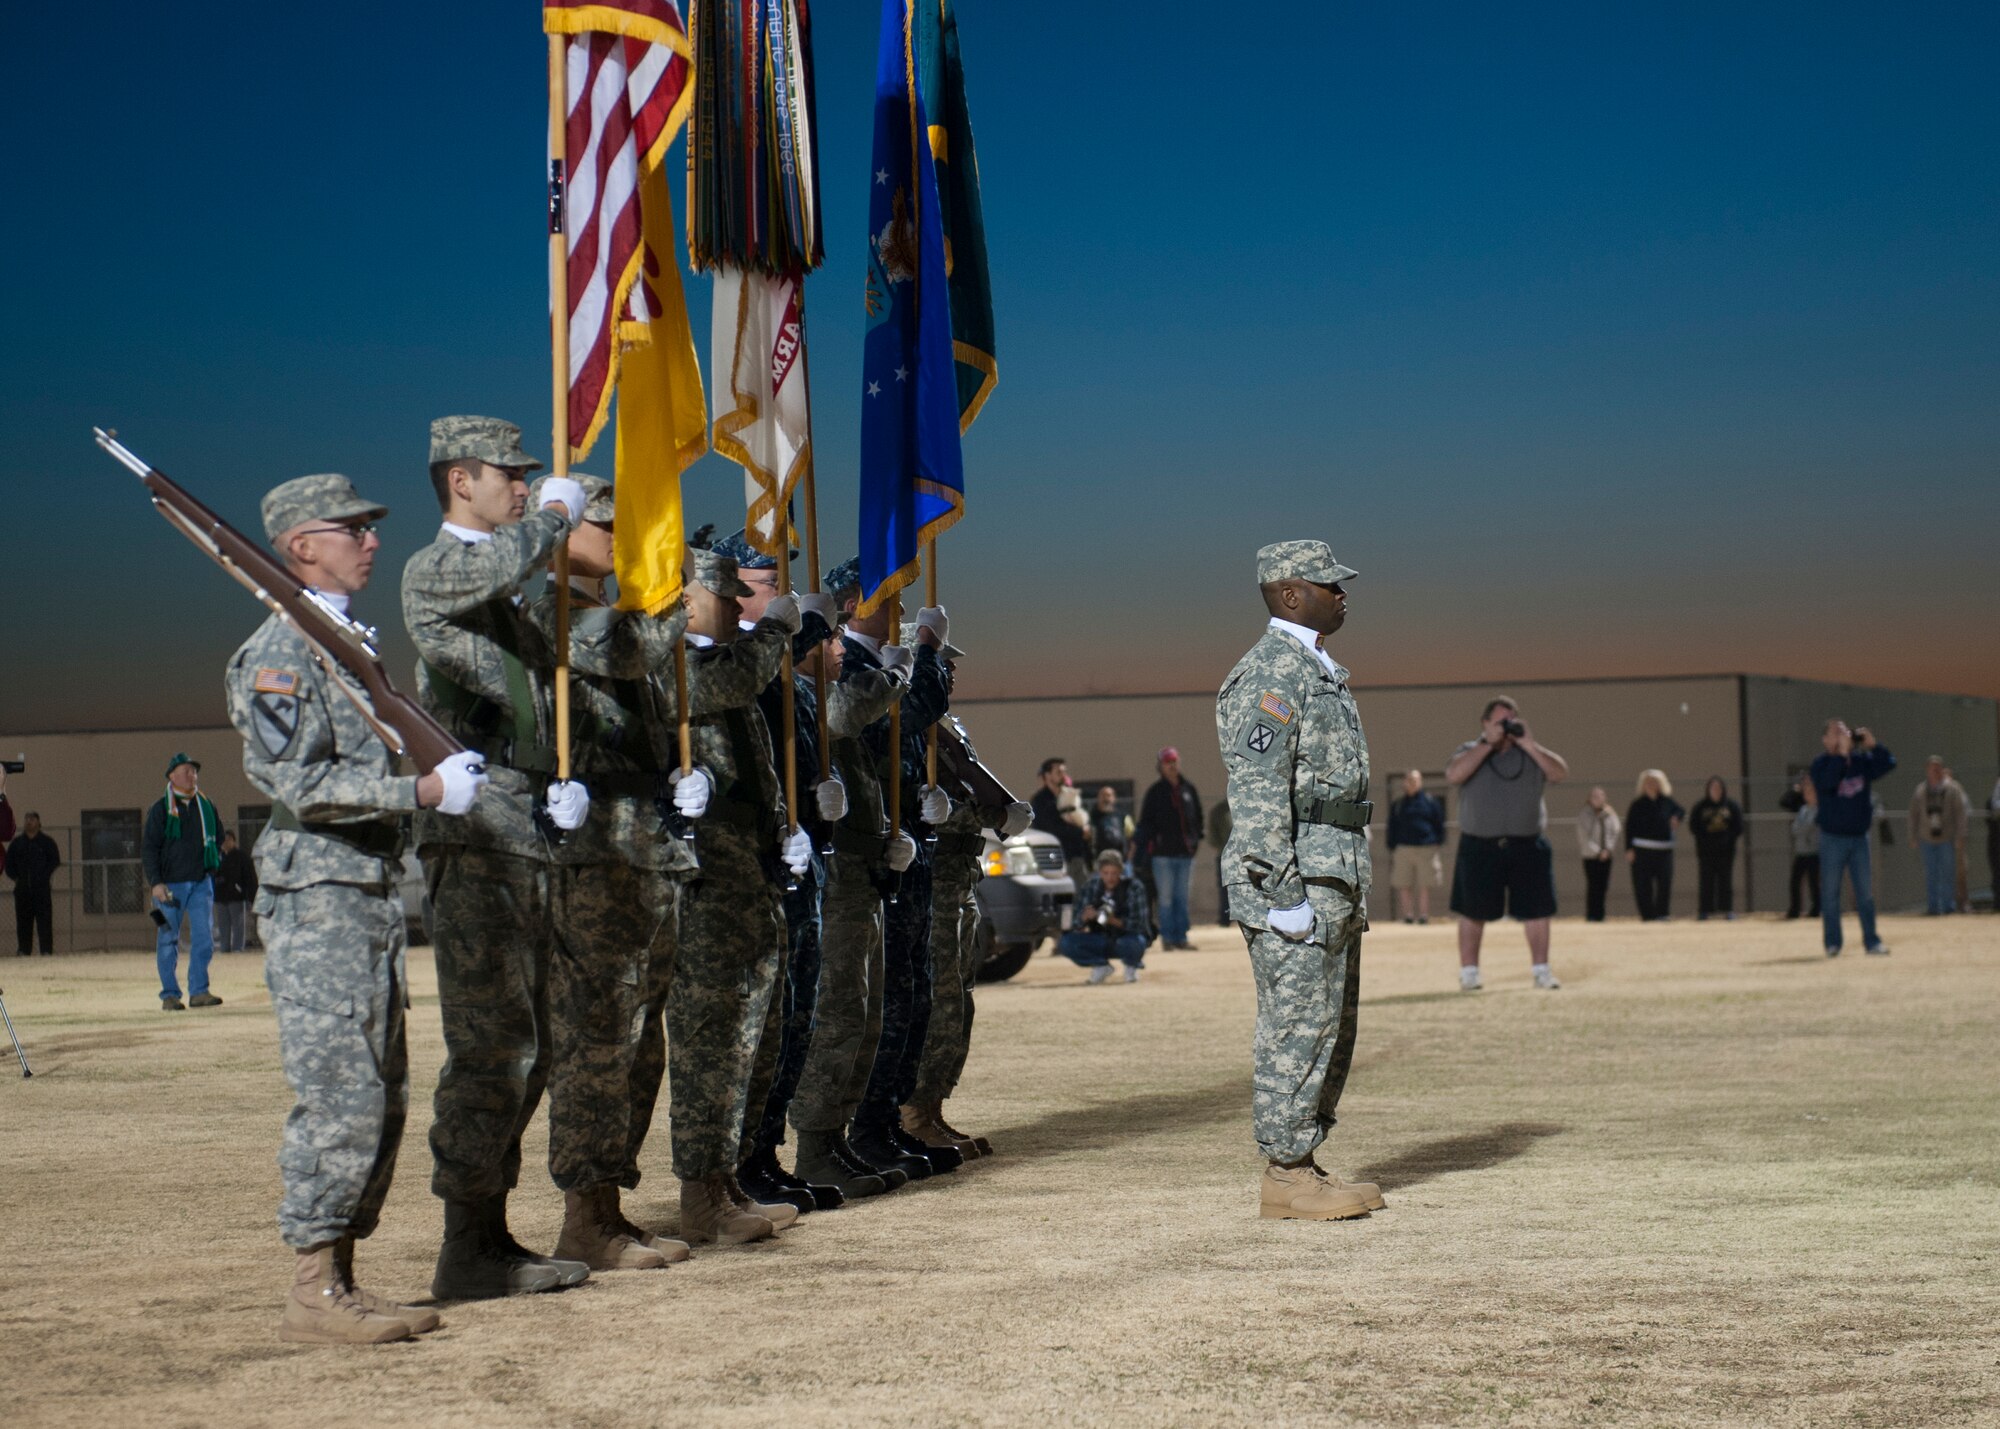 The White Sands Missile Range honor guard posts the colors during the opening ceremony of the 24th annual Bataan Memorial Death March at White Sands Missile Range, N.M., March 17. More than 5,800 people who were from across the world participated in the 26.2-milememorial marathon to honor the 76,000 prisoners of war forced to endure marching nearly 80 miles under brutal conditions during World War II. The event included both a full 26.2-mile marathon and a 15.2-mile honorary march. (U.S.  Air Force photo by Airman 1st Class Daniel E. Liddicoet/Released)